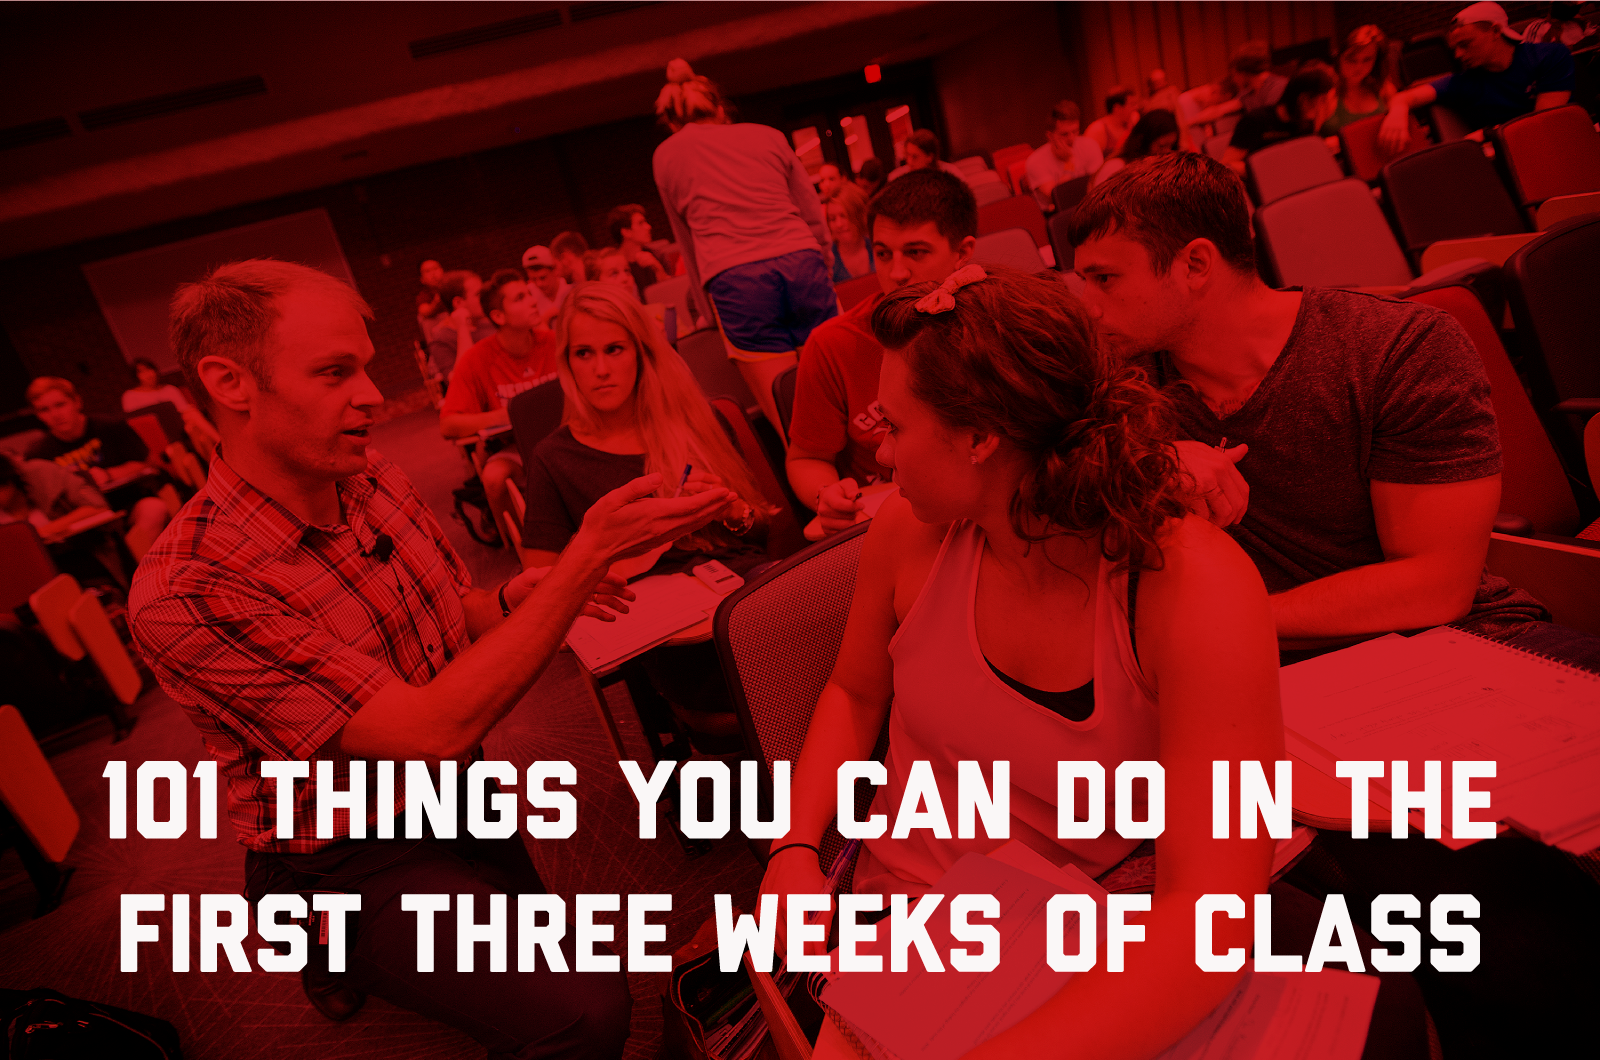 101 Things You Can Do in the First Three Weeks of Class